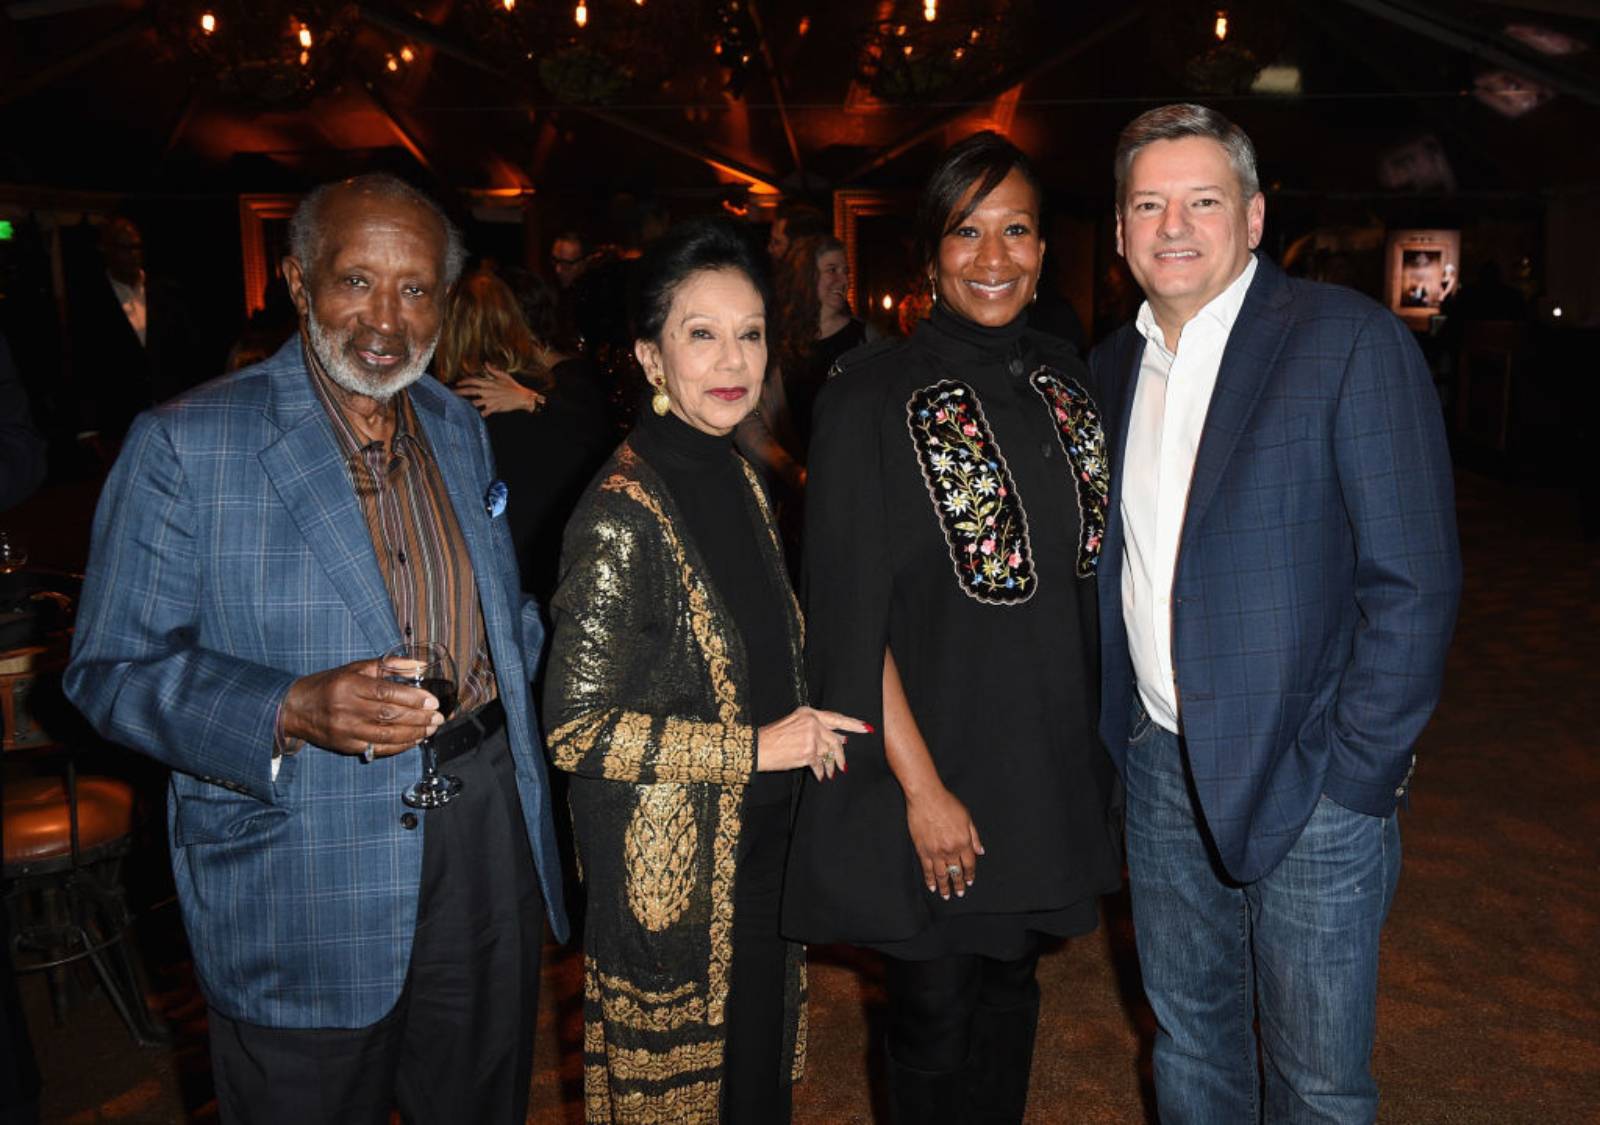 Clarence Avant, Jacqueline Avant, Ambassador Nicole Avant, and Ted Sarandos attend Norman Lear's 95th Birthday Celebration on December 7, 2017 in Los Angeles, California. (Photo by Joshua Blanchard/Getty Images for People For the American Way)